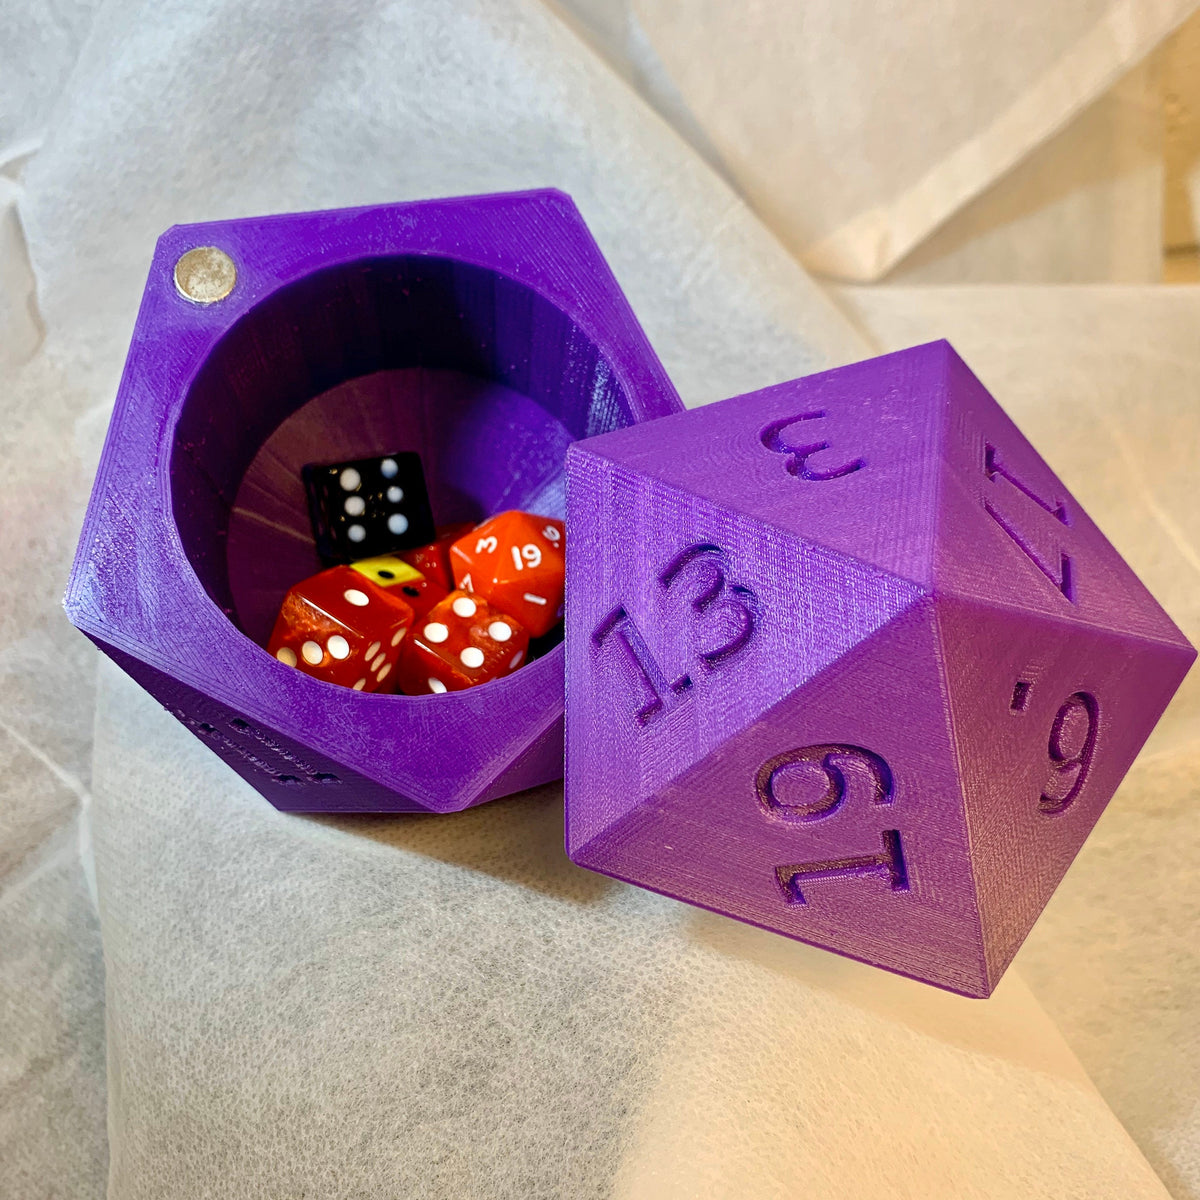 D20 Dice Box - Magnetic Lock Storage Container | MTG | D&D Gift